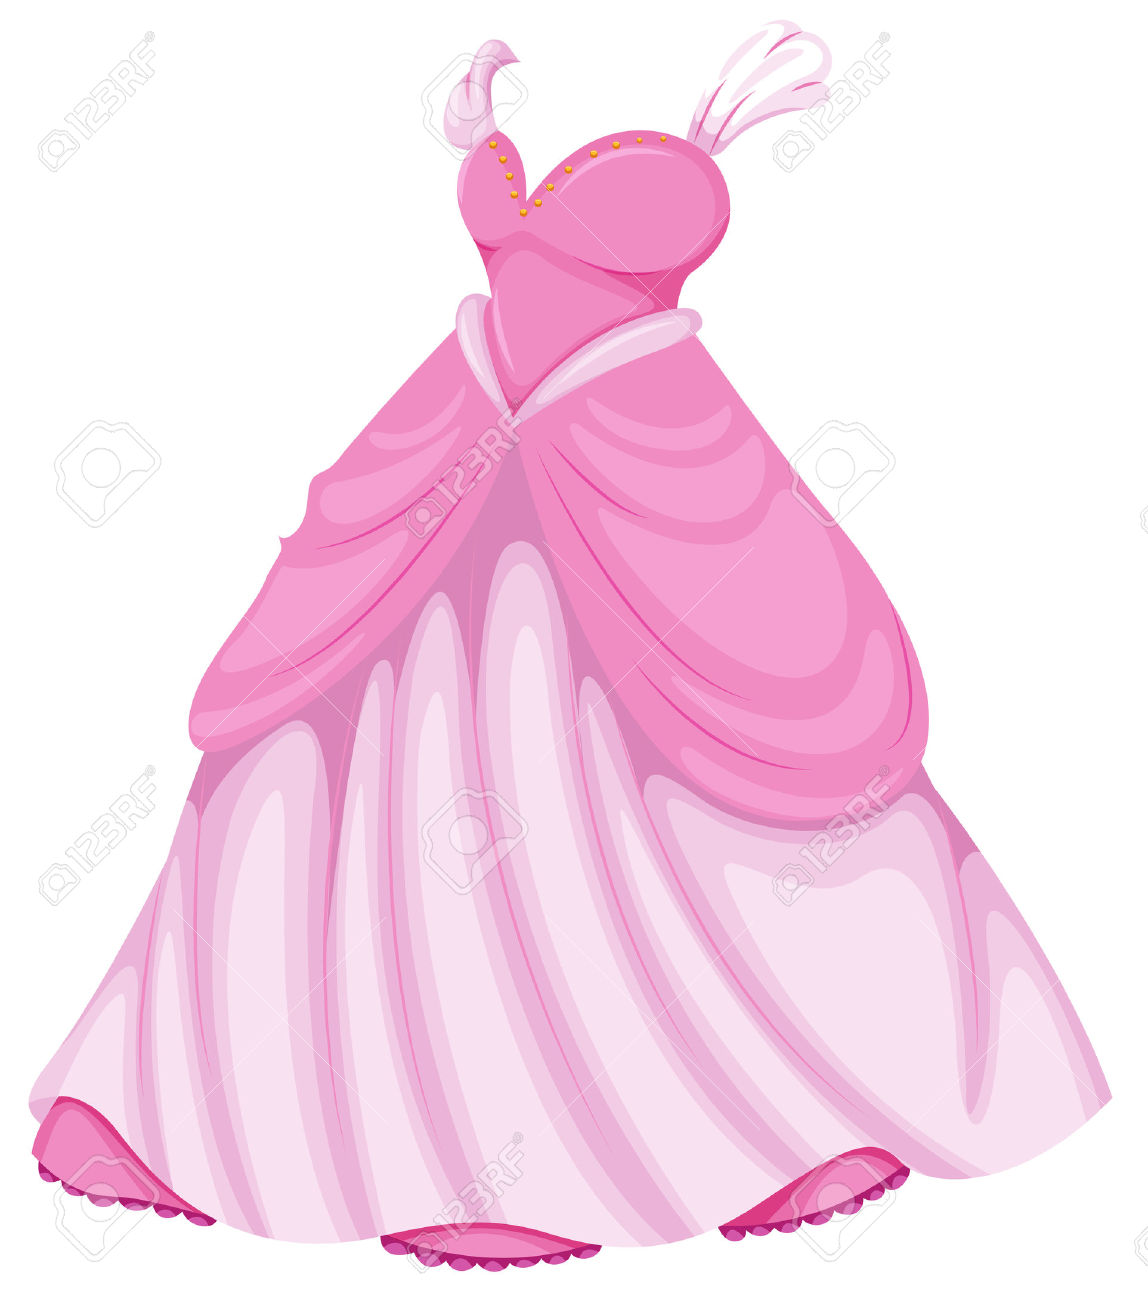 Robes clipart #4, Download drawings